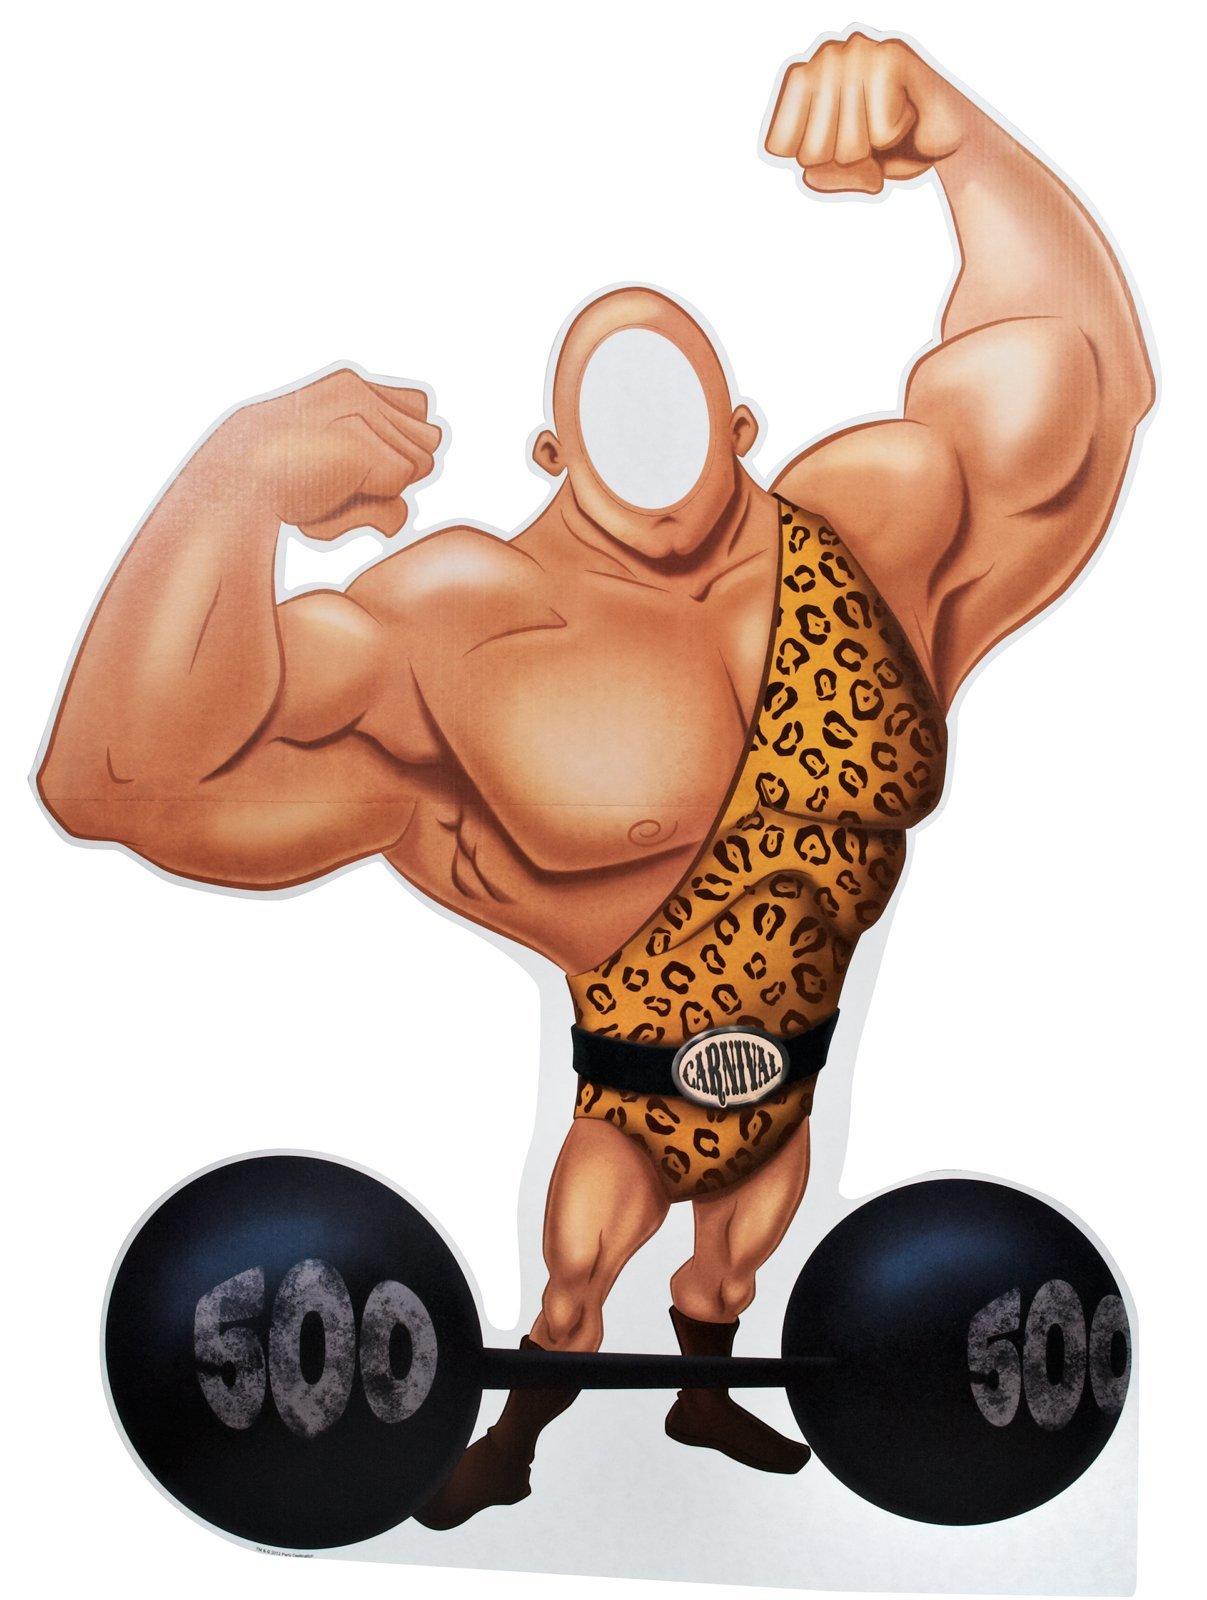 Carnival muscle man clipart